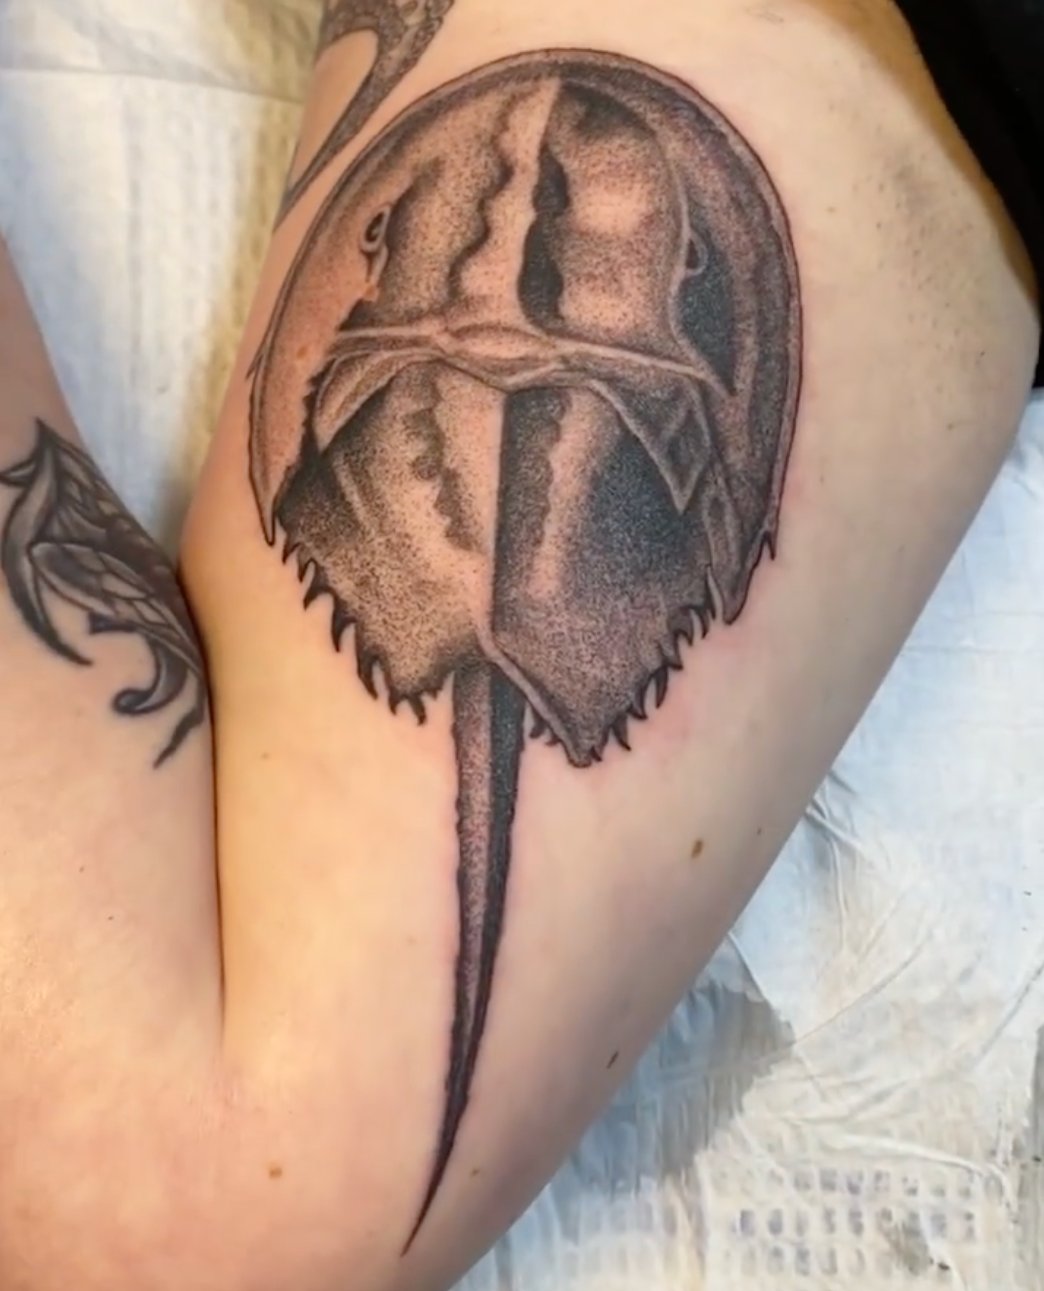 Commis Horseshoe Crab Tattoo by Reanimated4now on DeviantArt